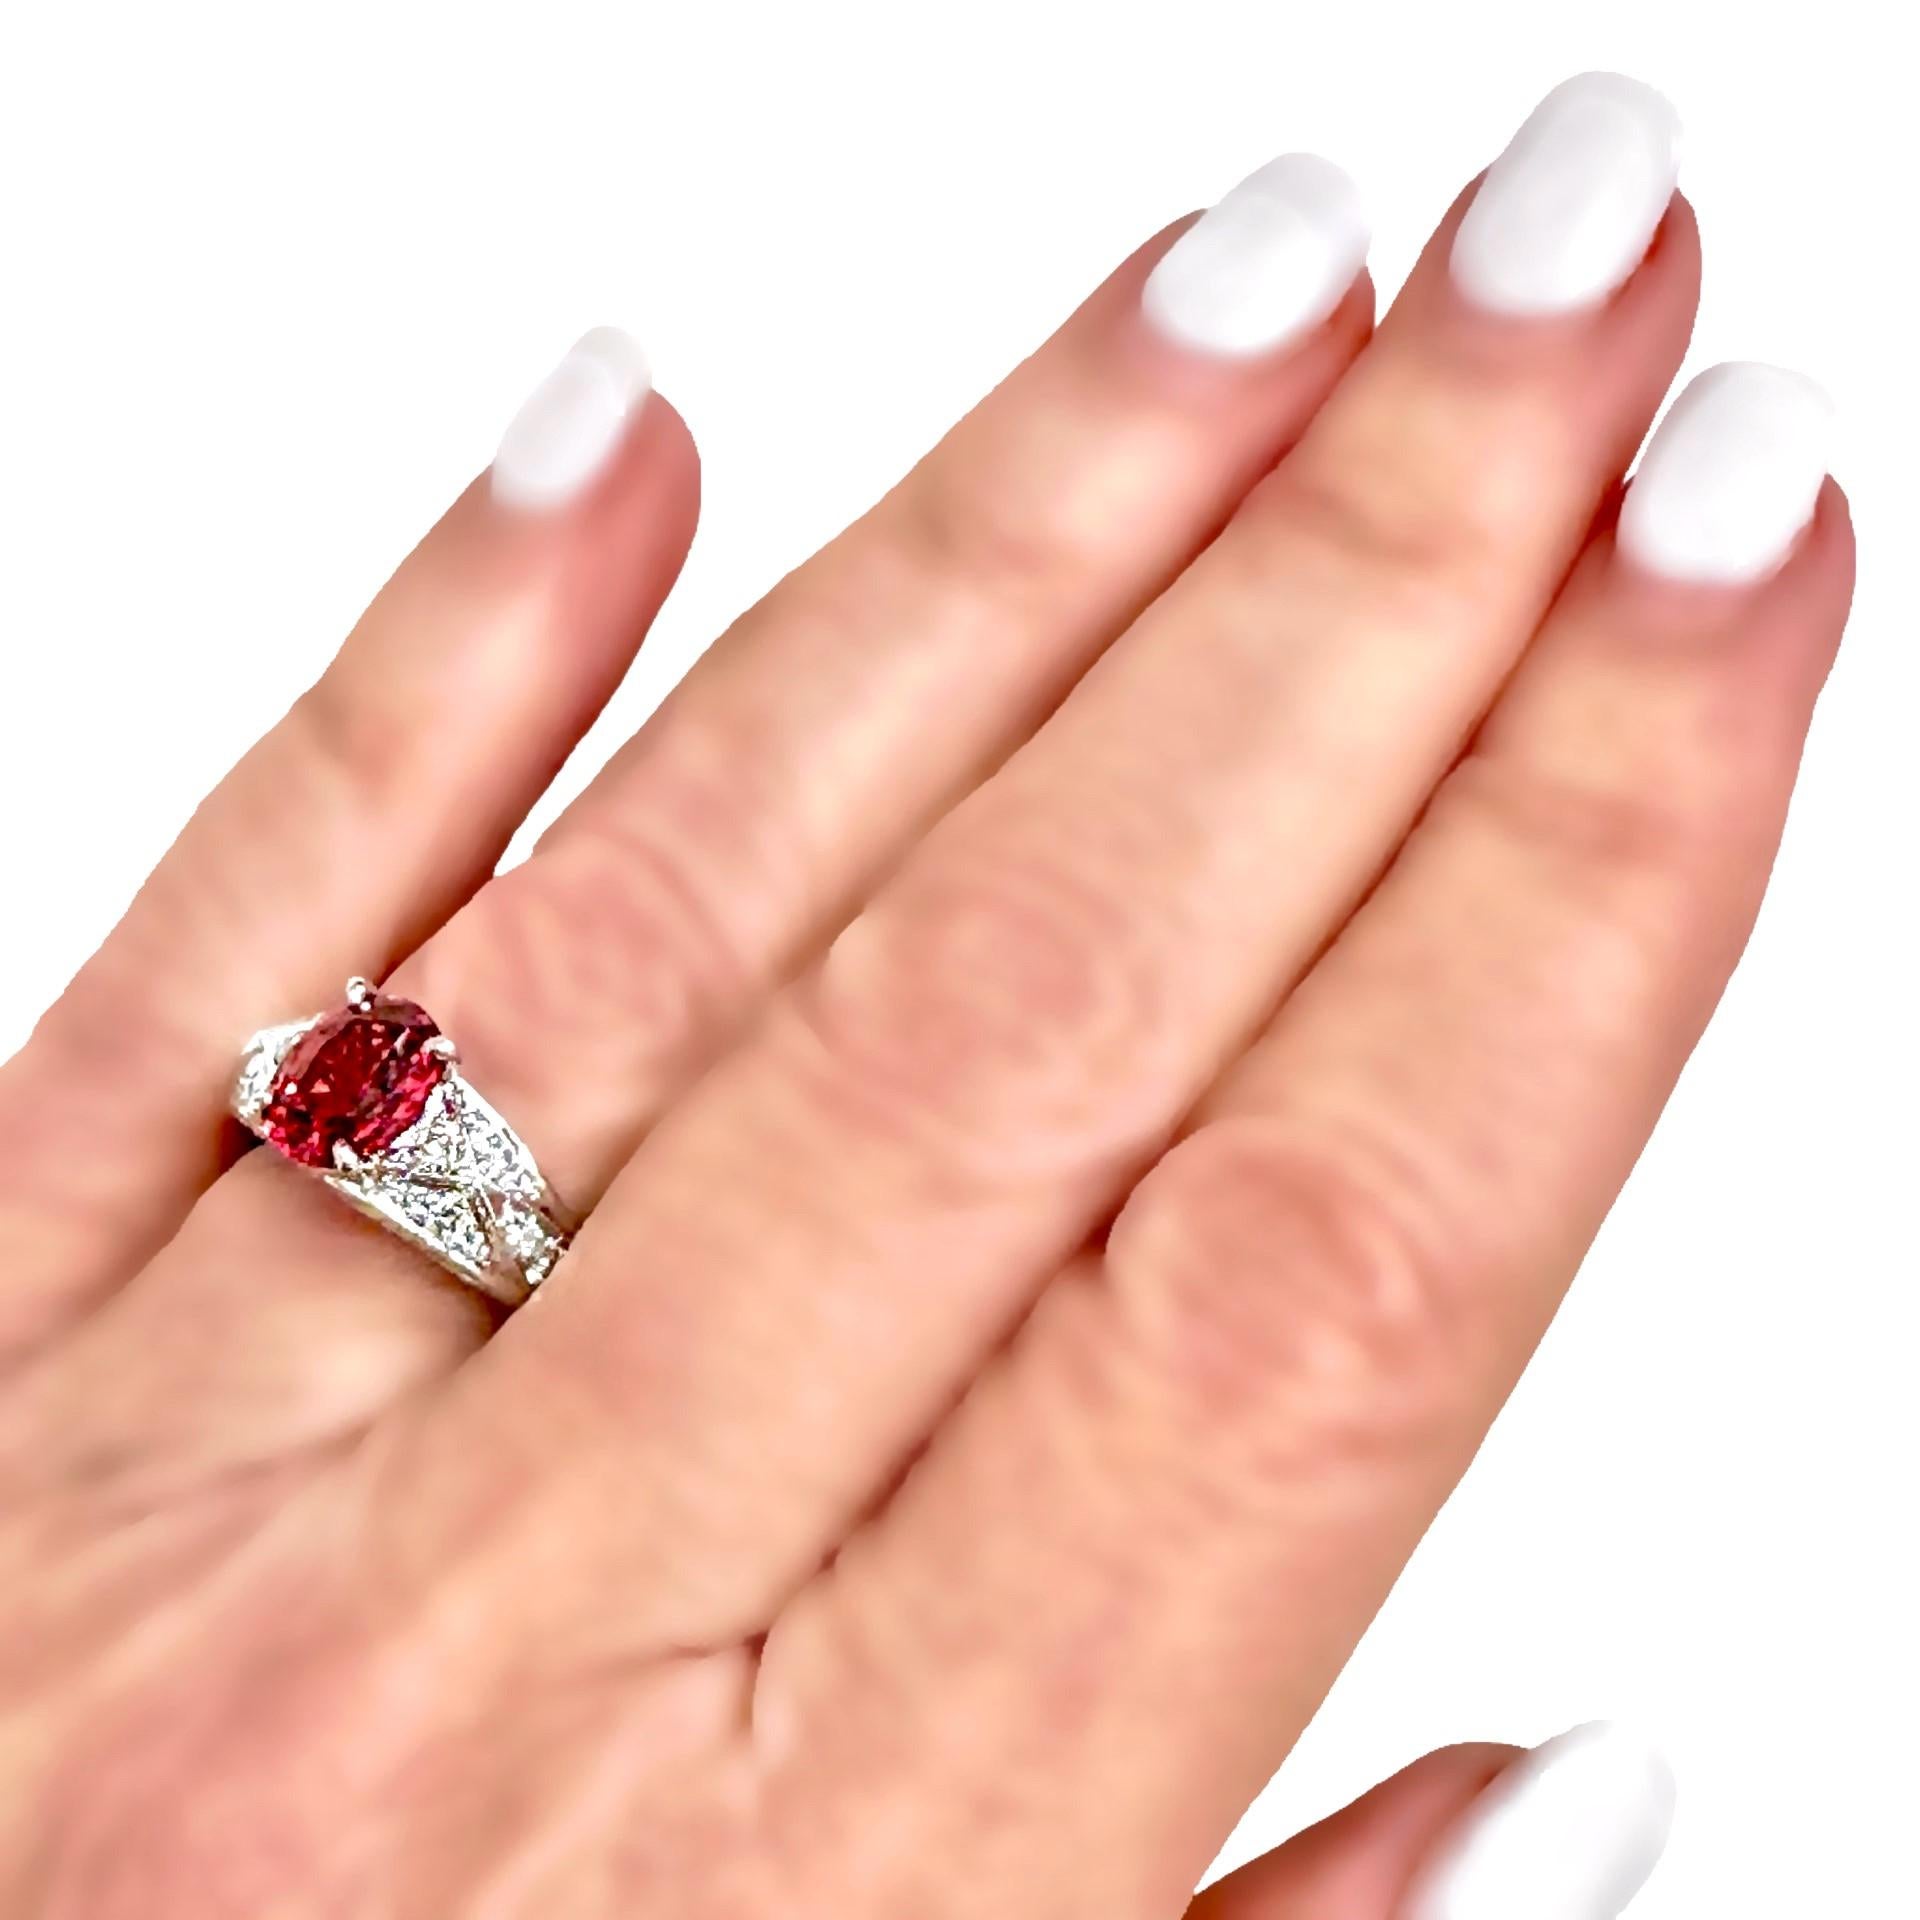 Vivid Oval Shaped Orangy-Red Burmese Spinel set in Platinum Ring with Diamonds 8